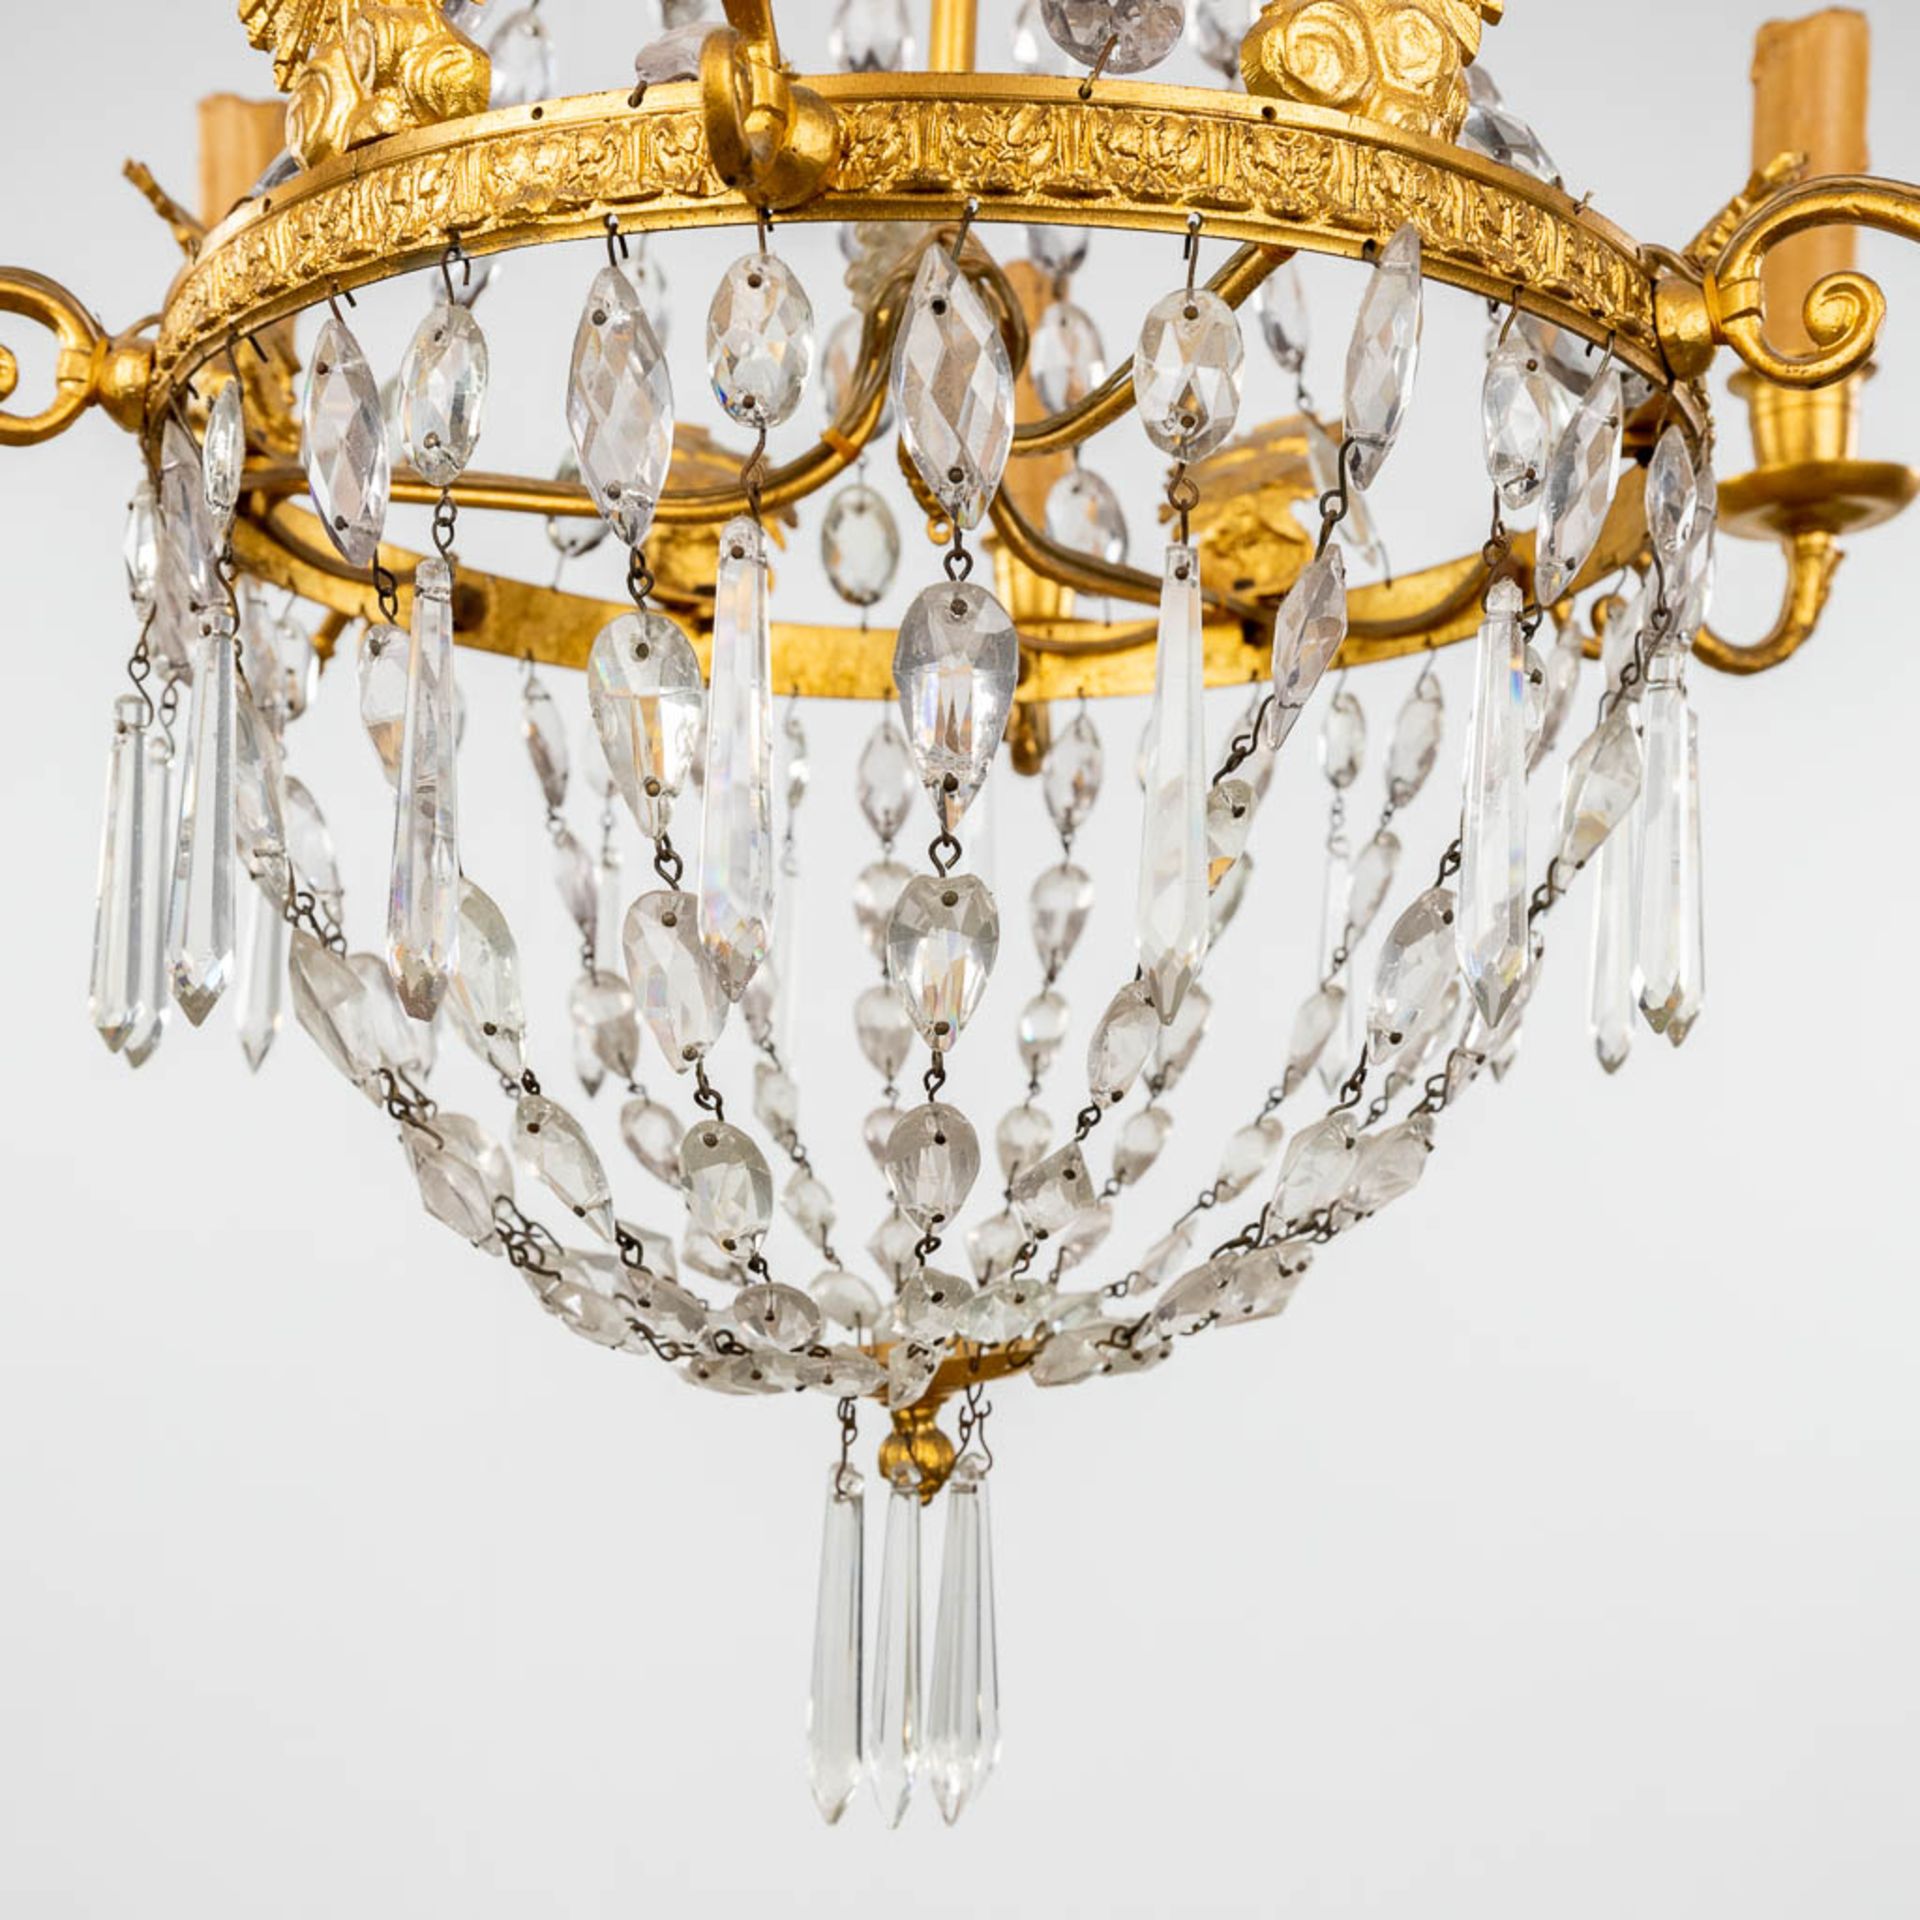 A chandelier 'Sac ˆ Perles', bronze and glass in empire style. 20th C. (H: 100 x D: 50 cm) - Bild 6 aus 11